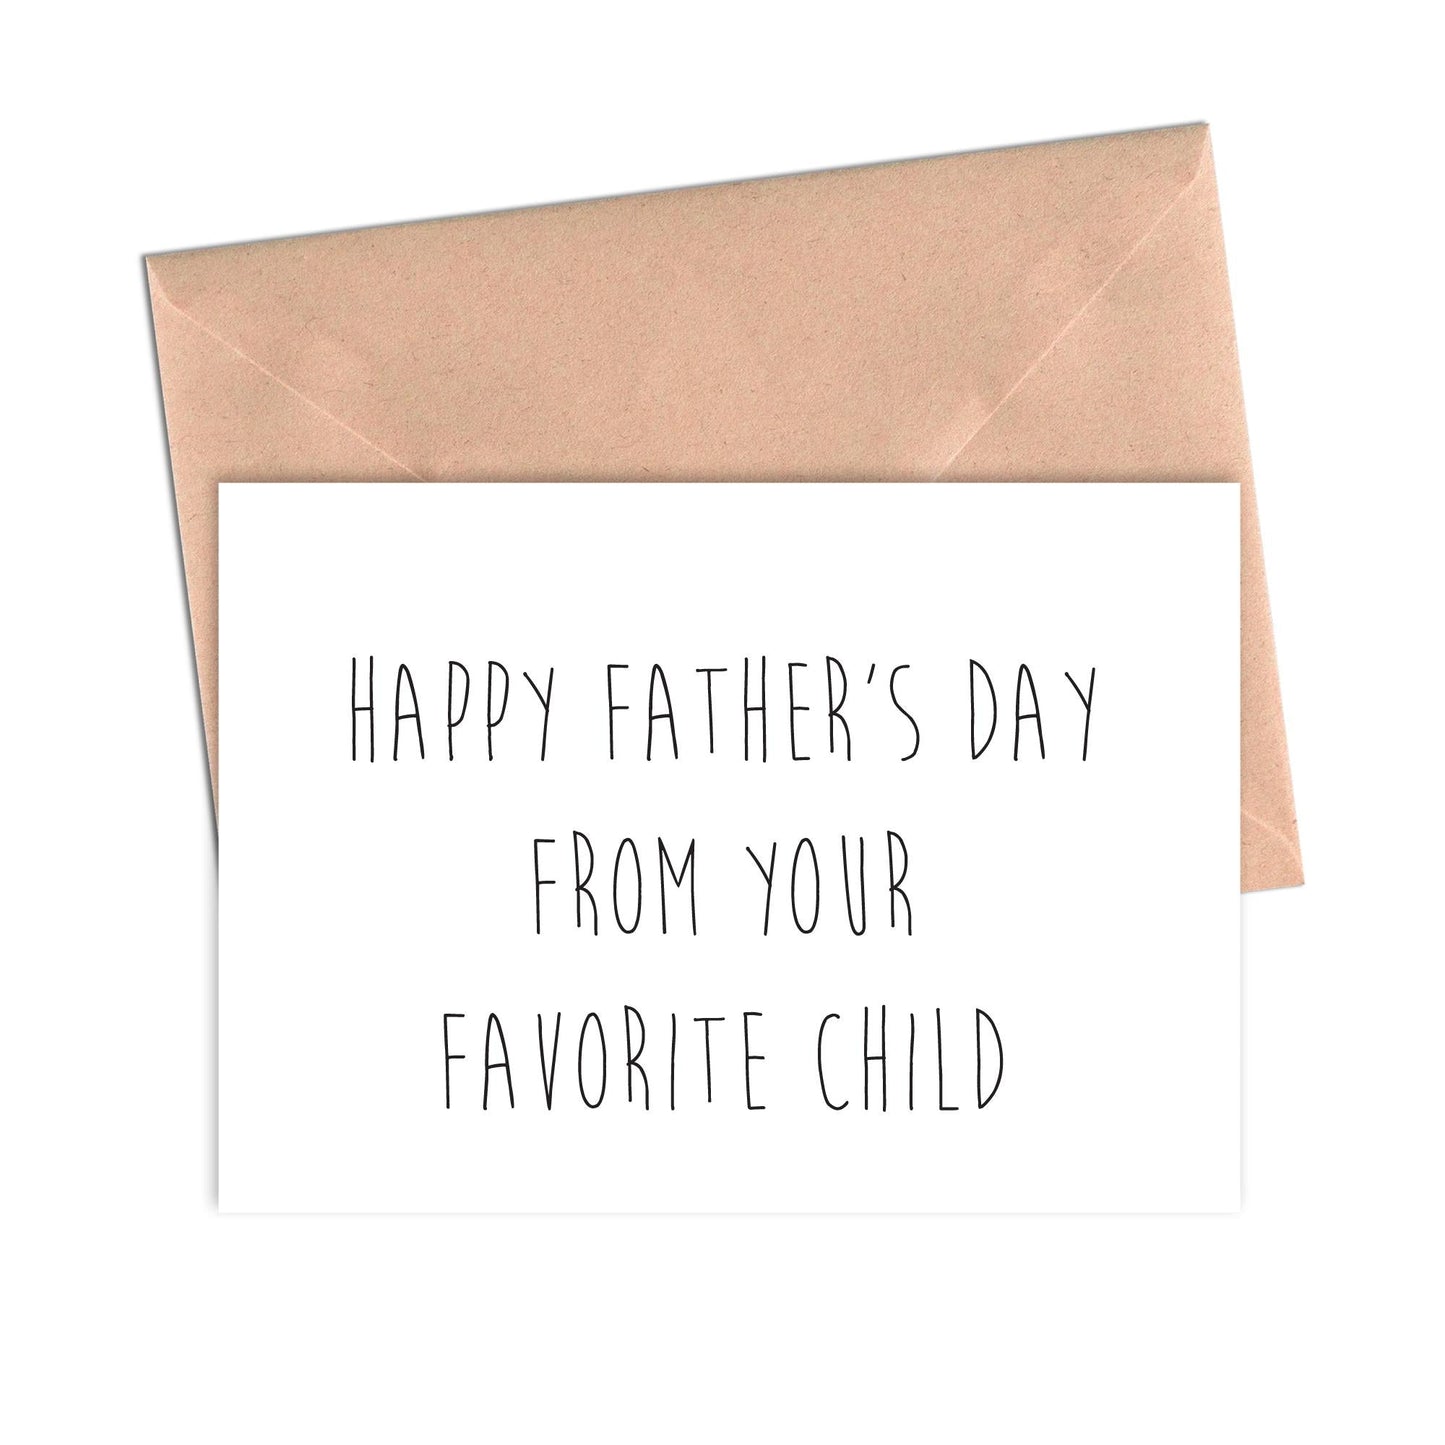 Unique Father's Day Cards With Cricut Joy - Ahalfbakedmom